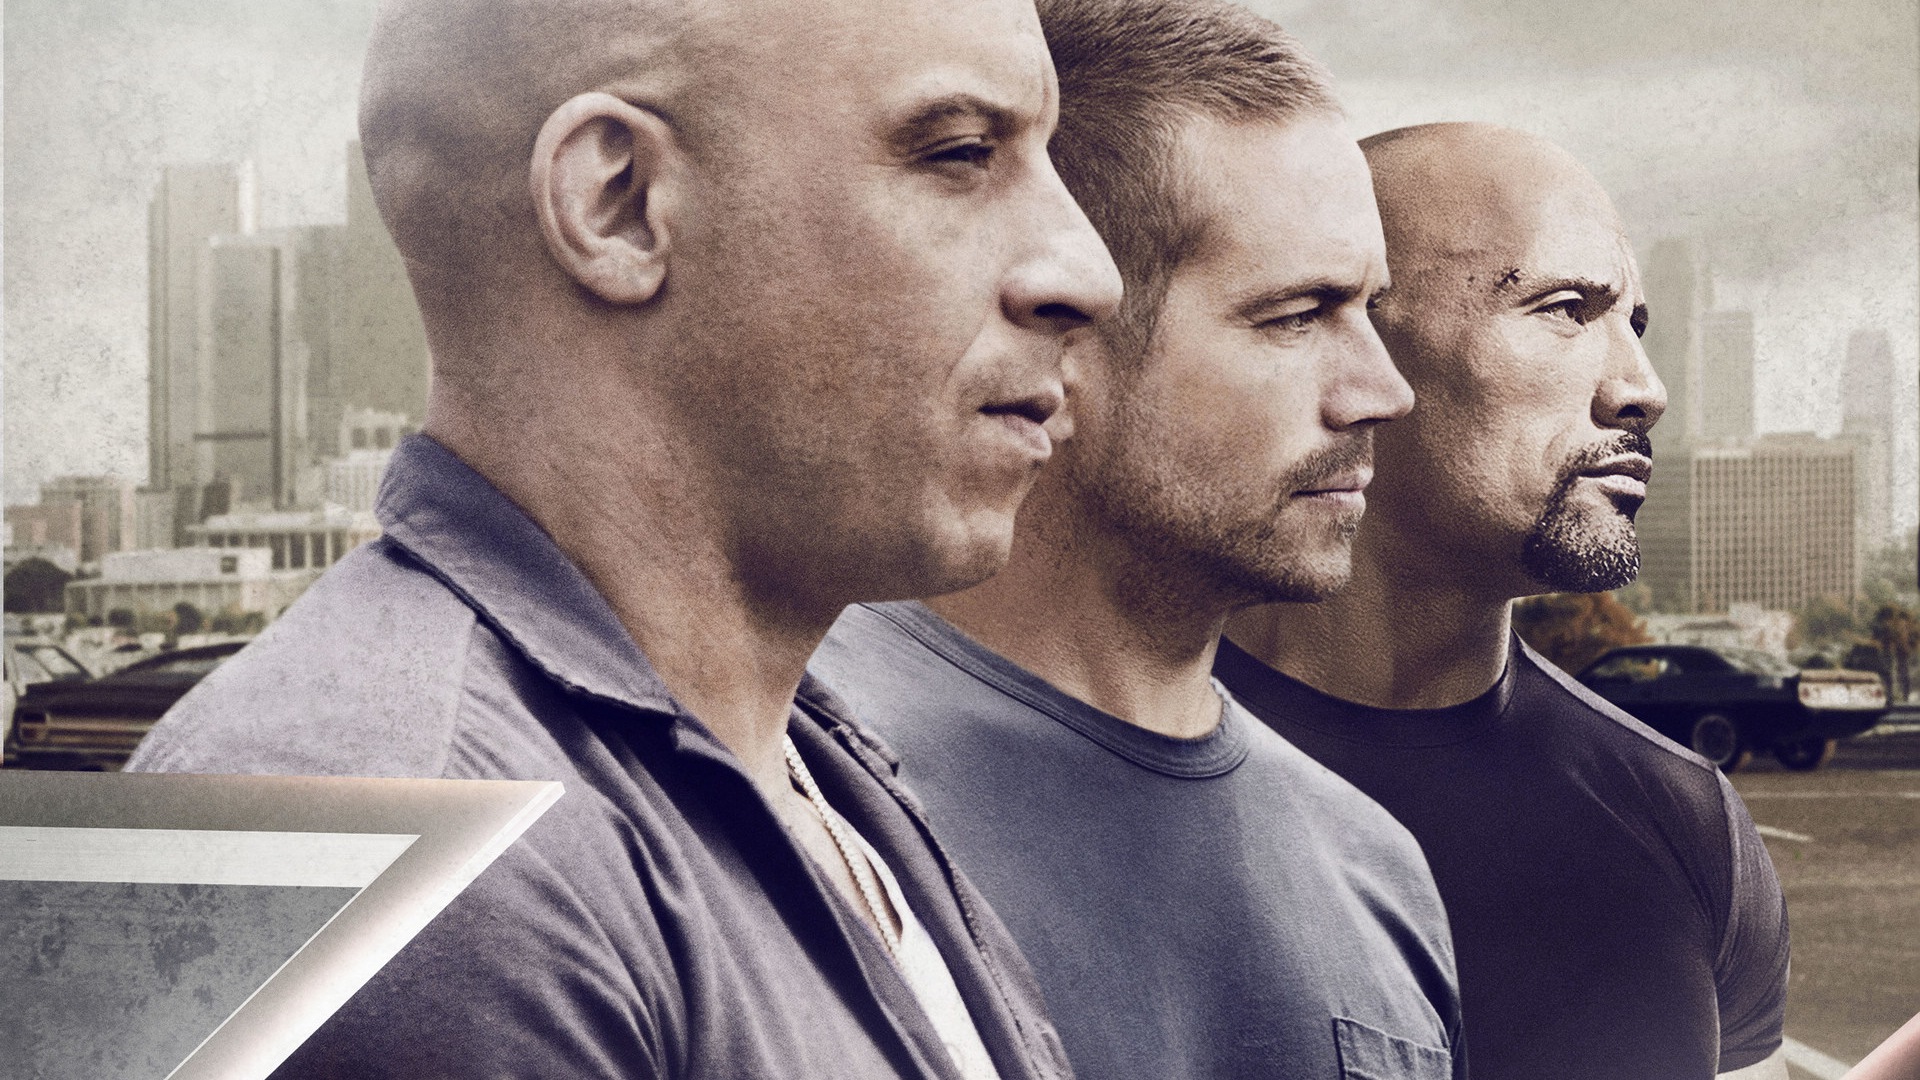 Fast and Furious 7 HD movie wallpapers #5 - 1920x1080